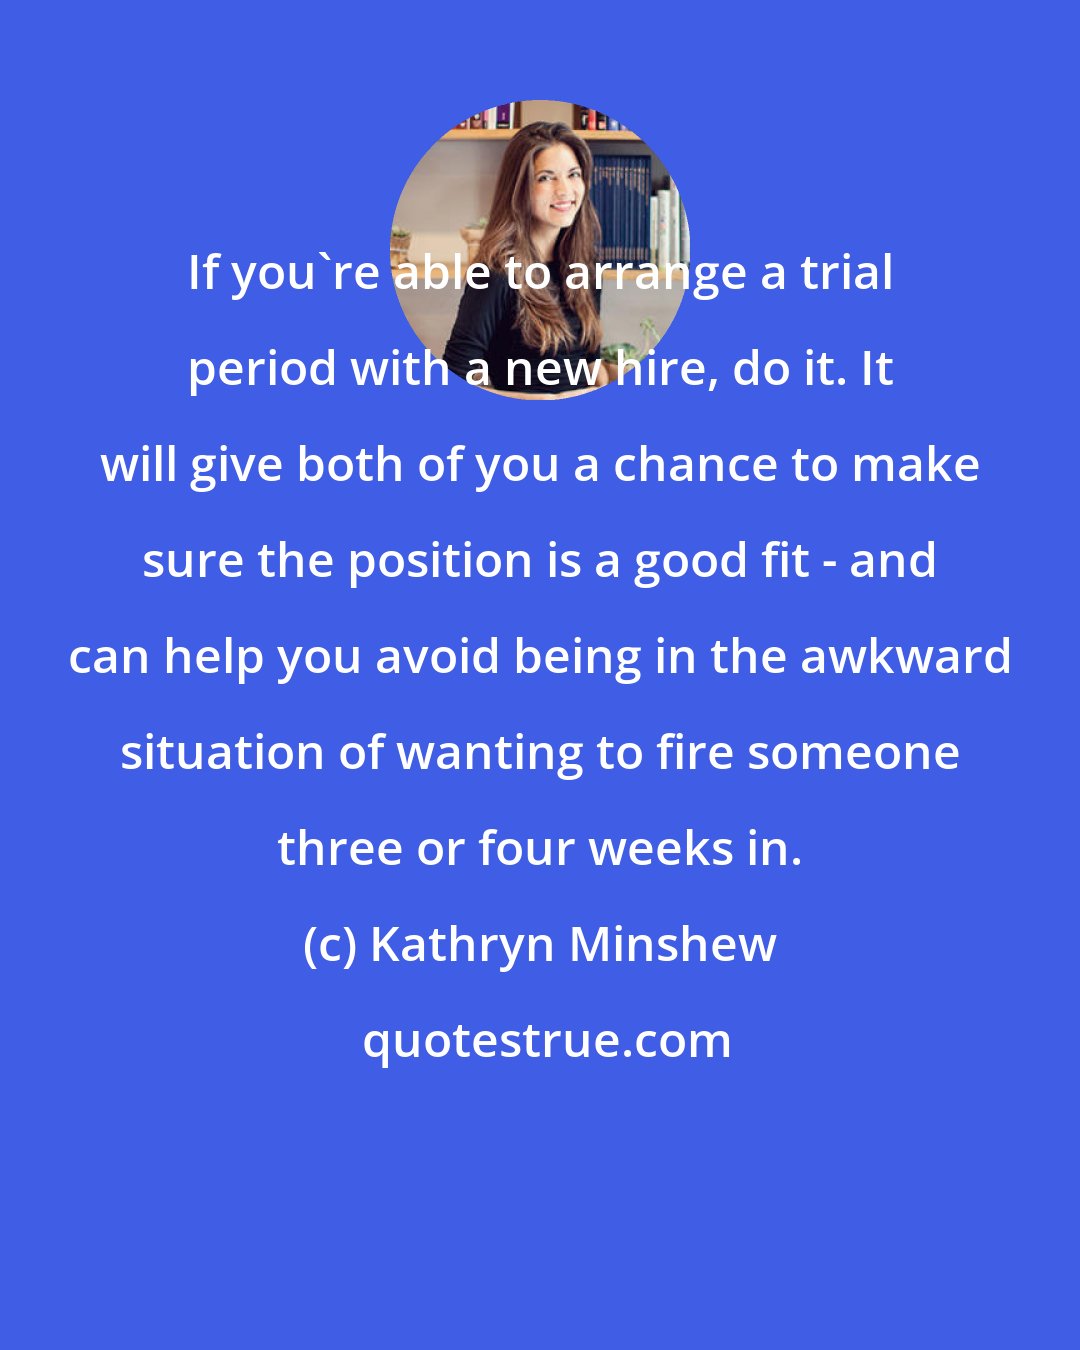 Kathryn Minshew: If you're able to arrange a trial period with a new hire, do it. It will give both of you a chance to make sure the position is a good fit - and can help you avoid being in the awkward situation of wanting to fire someone three or four weeks in.